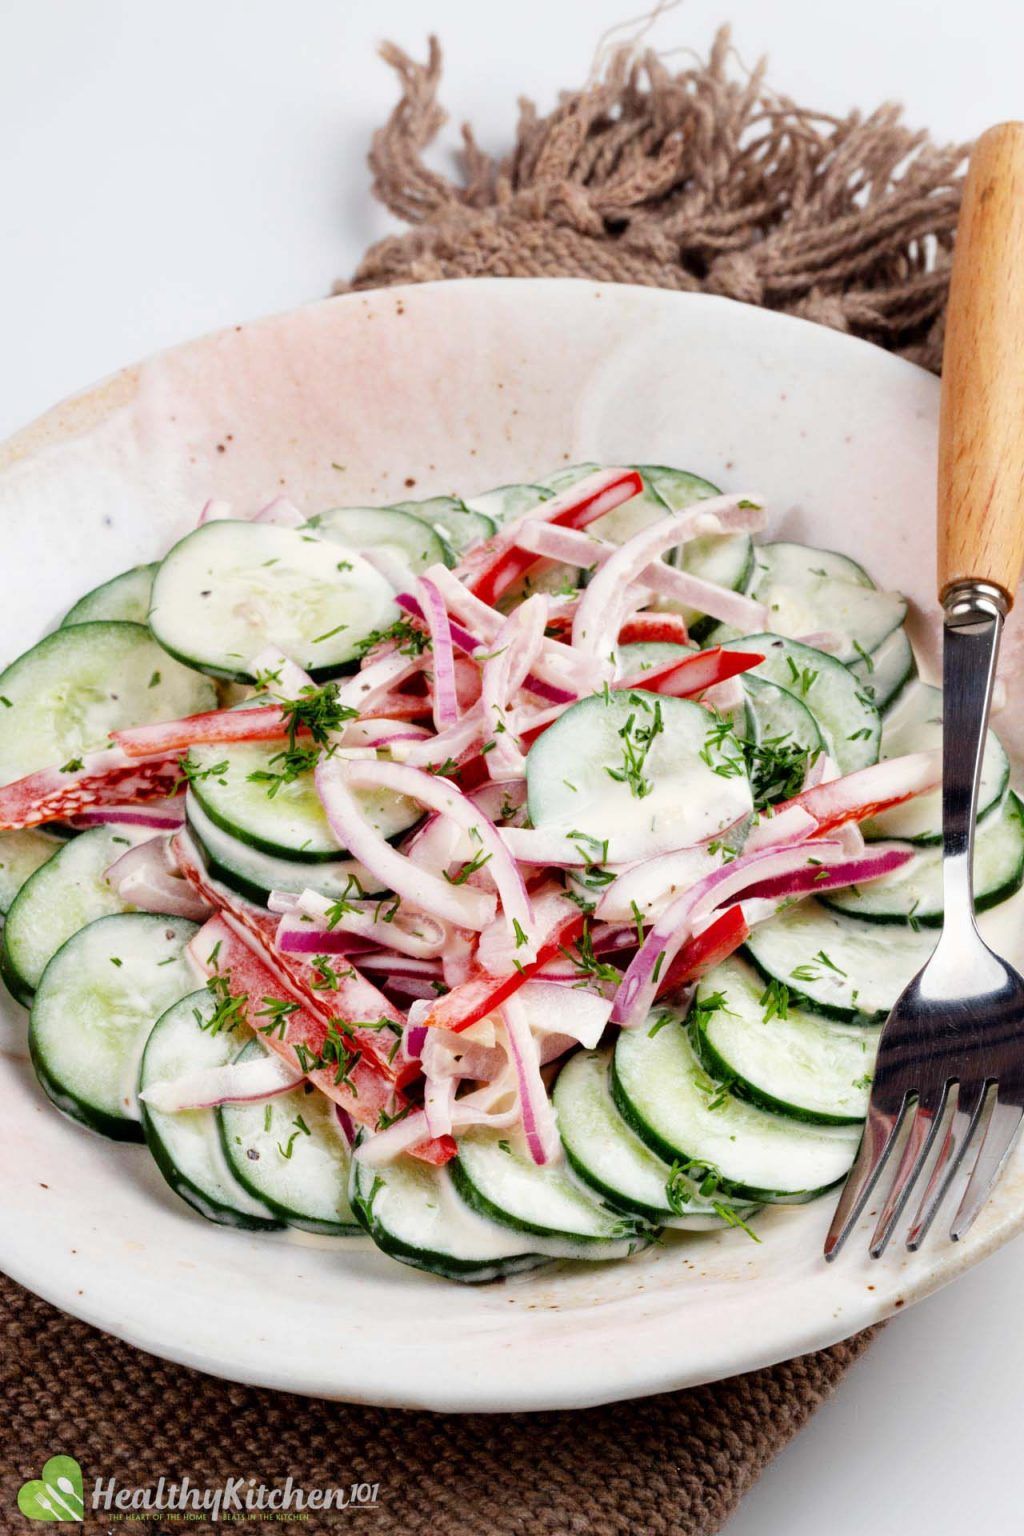 Cucumber Salad Recipe - A Simple and Healthy Side Dish for Summer